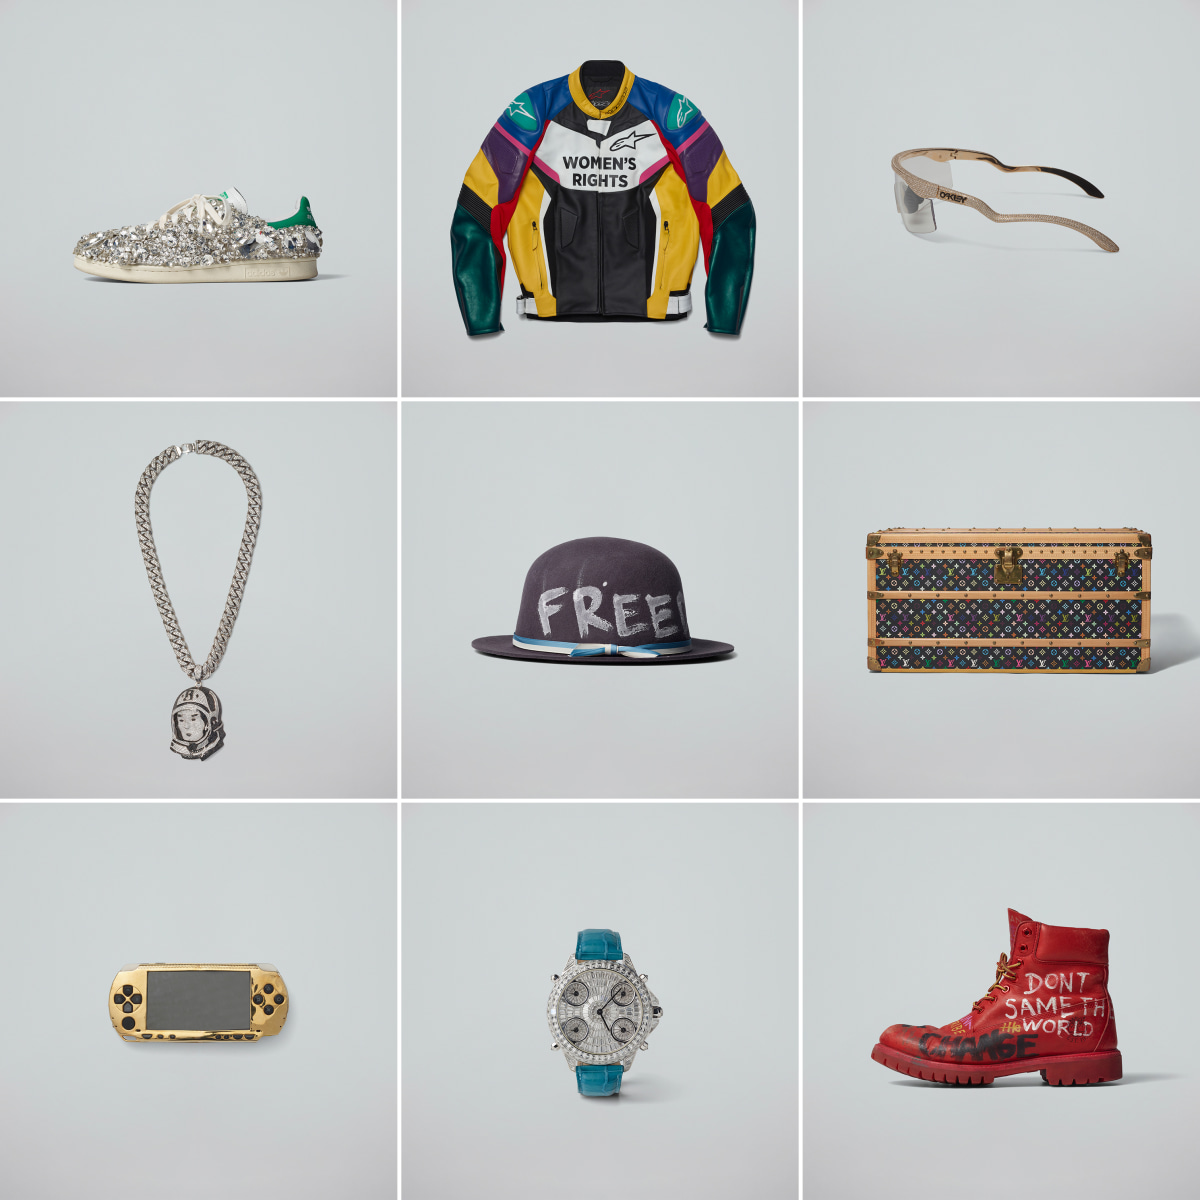 Pharrell Williams' New Auction Platform Attracts Asian Luxury Collectors'  Interest